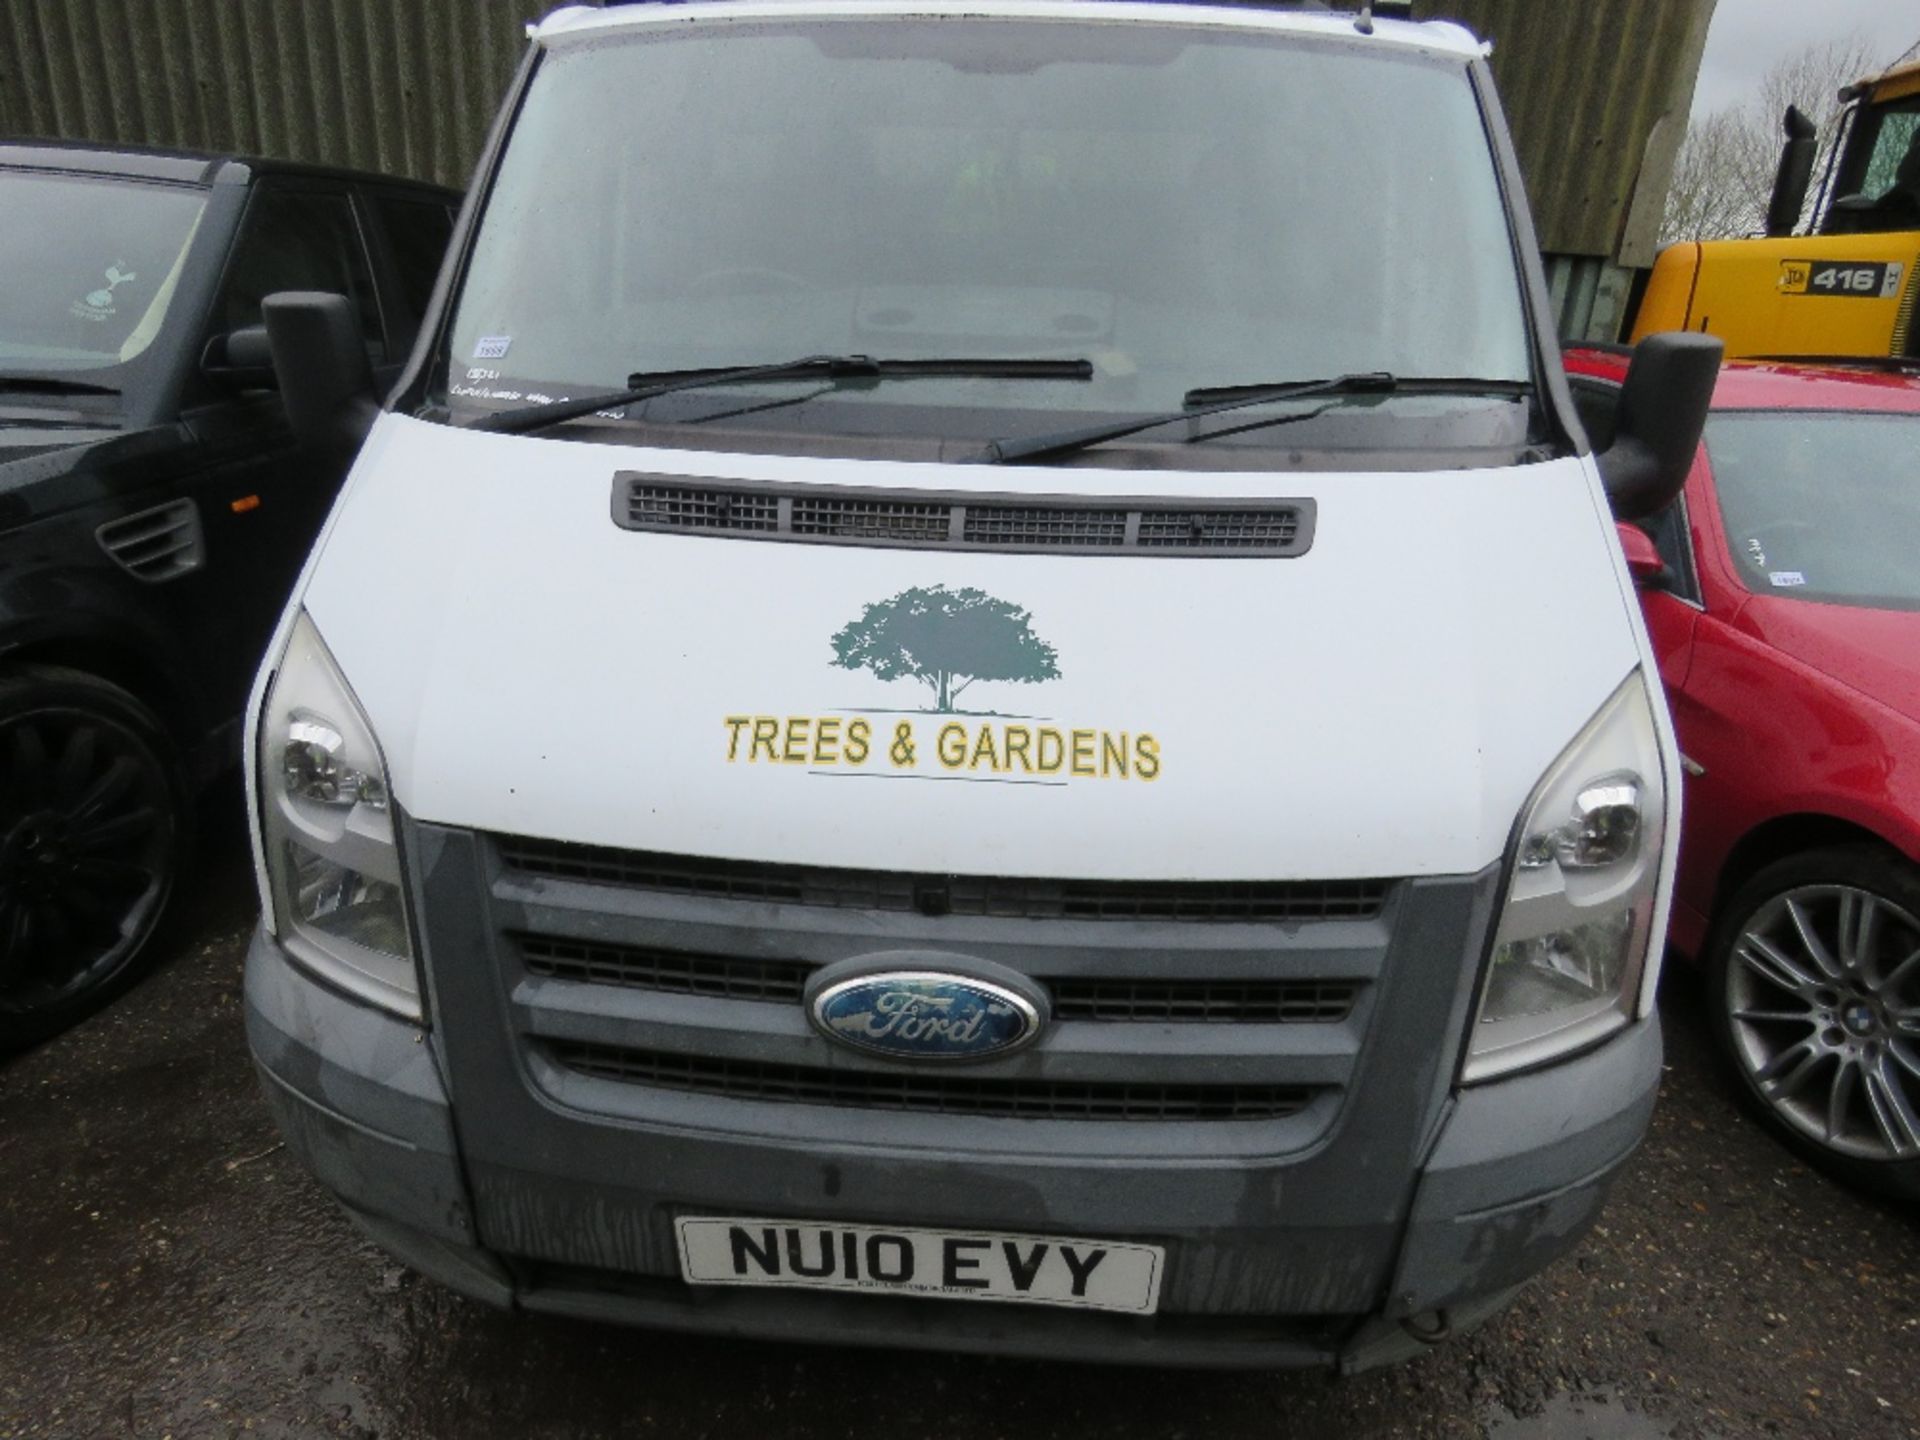 FORD TRANSIT TIPPER TRUCK REG:NU10 EVY WITH V5. MOT UNTIL FEBRUARY 2024. WHEN TESTED WAS SEEN TO DRI - Image 2 of 10